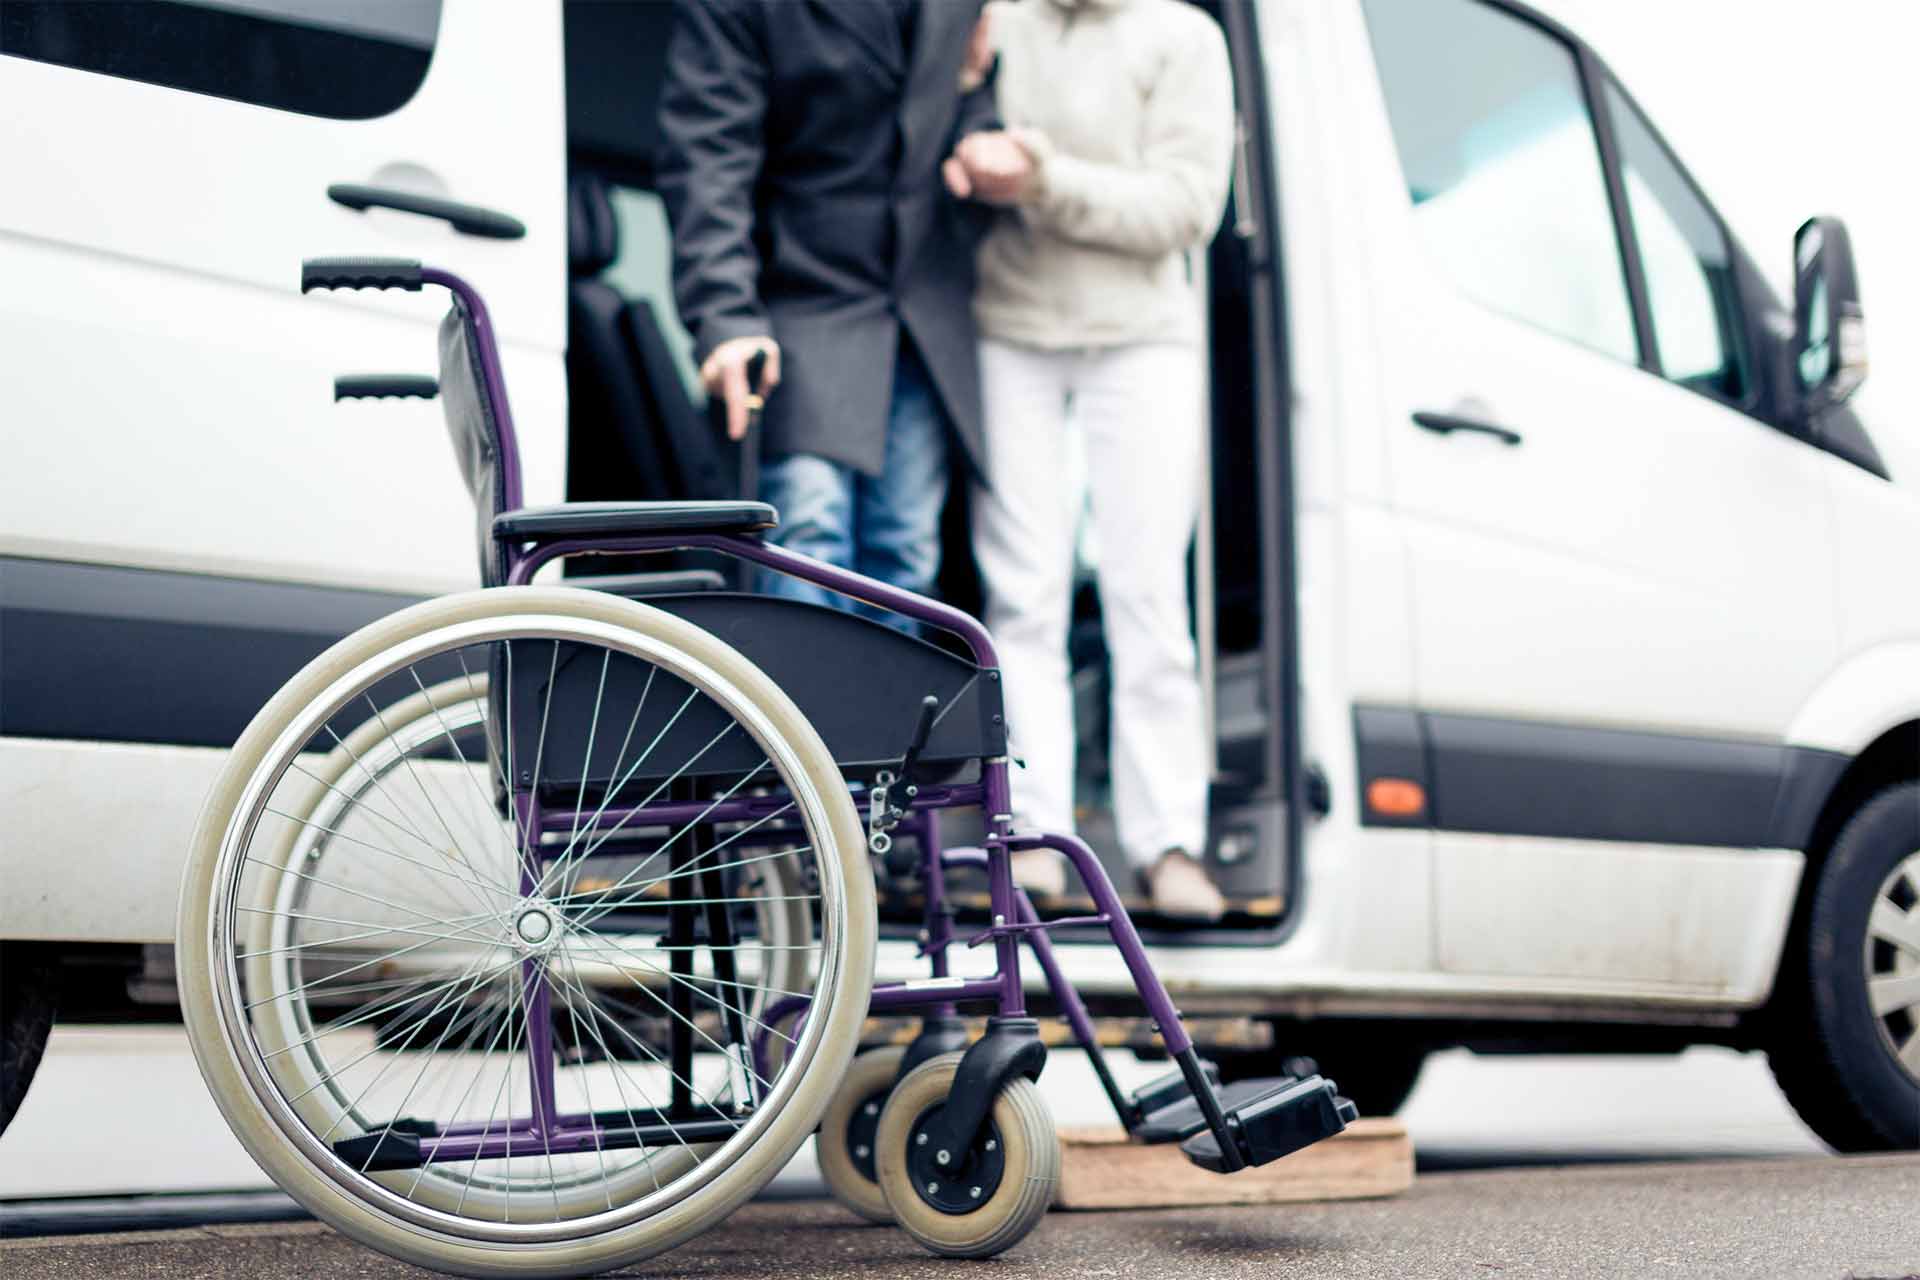 Assisting a wheelchair passenger from van